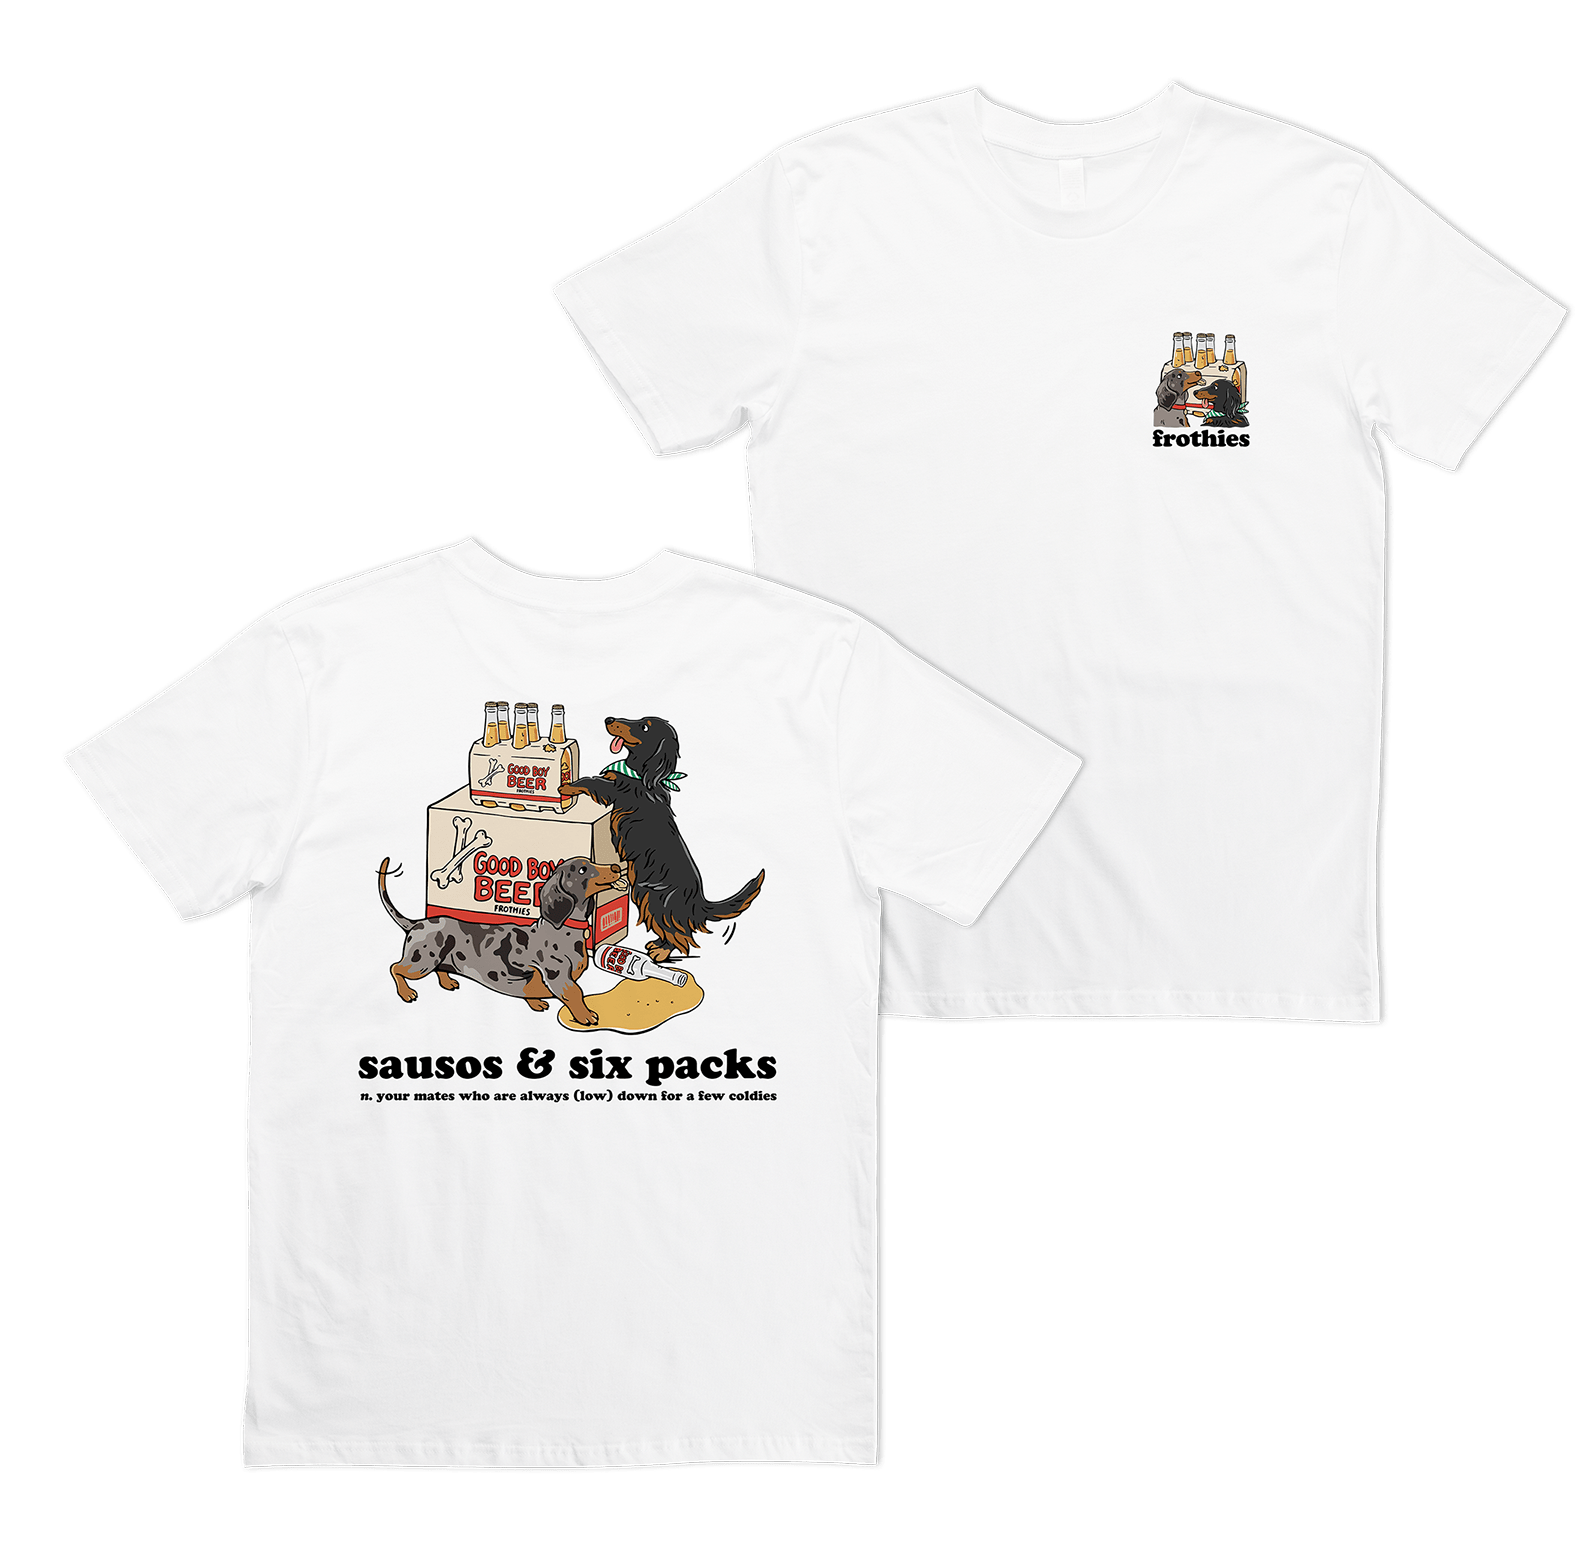 Sausos & Six-Packs Tee T-Shirt Frothies